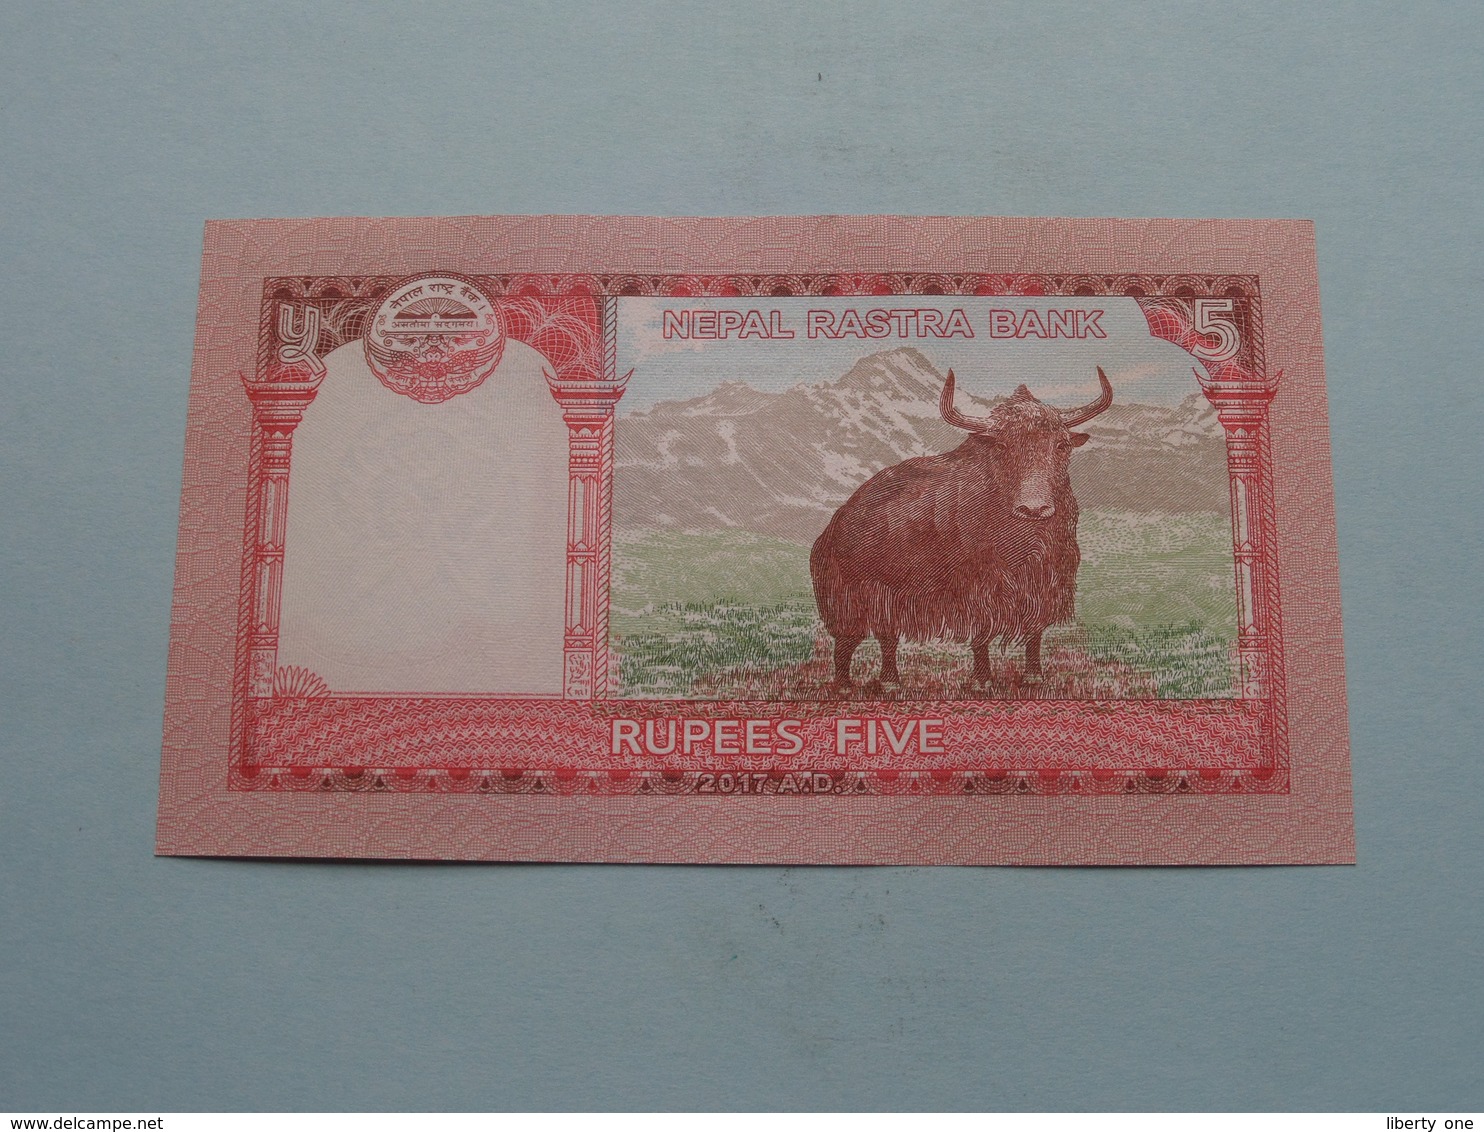 Rupees FIVE - NEPAL Rastra Bank 2017 A.D. ( For Grade, Please See Photo ) ! - Népal